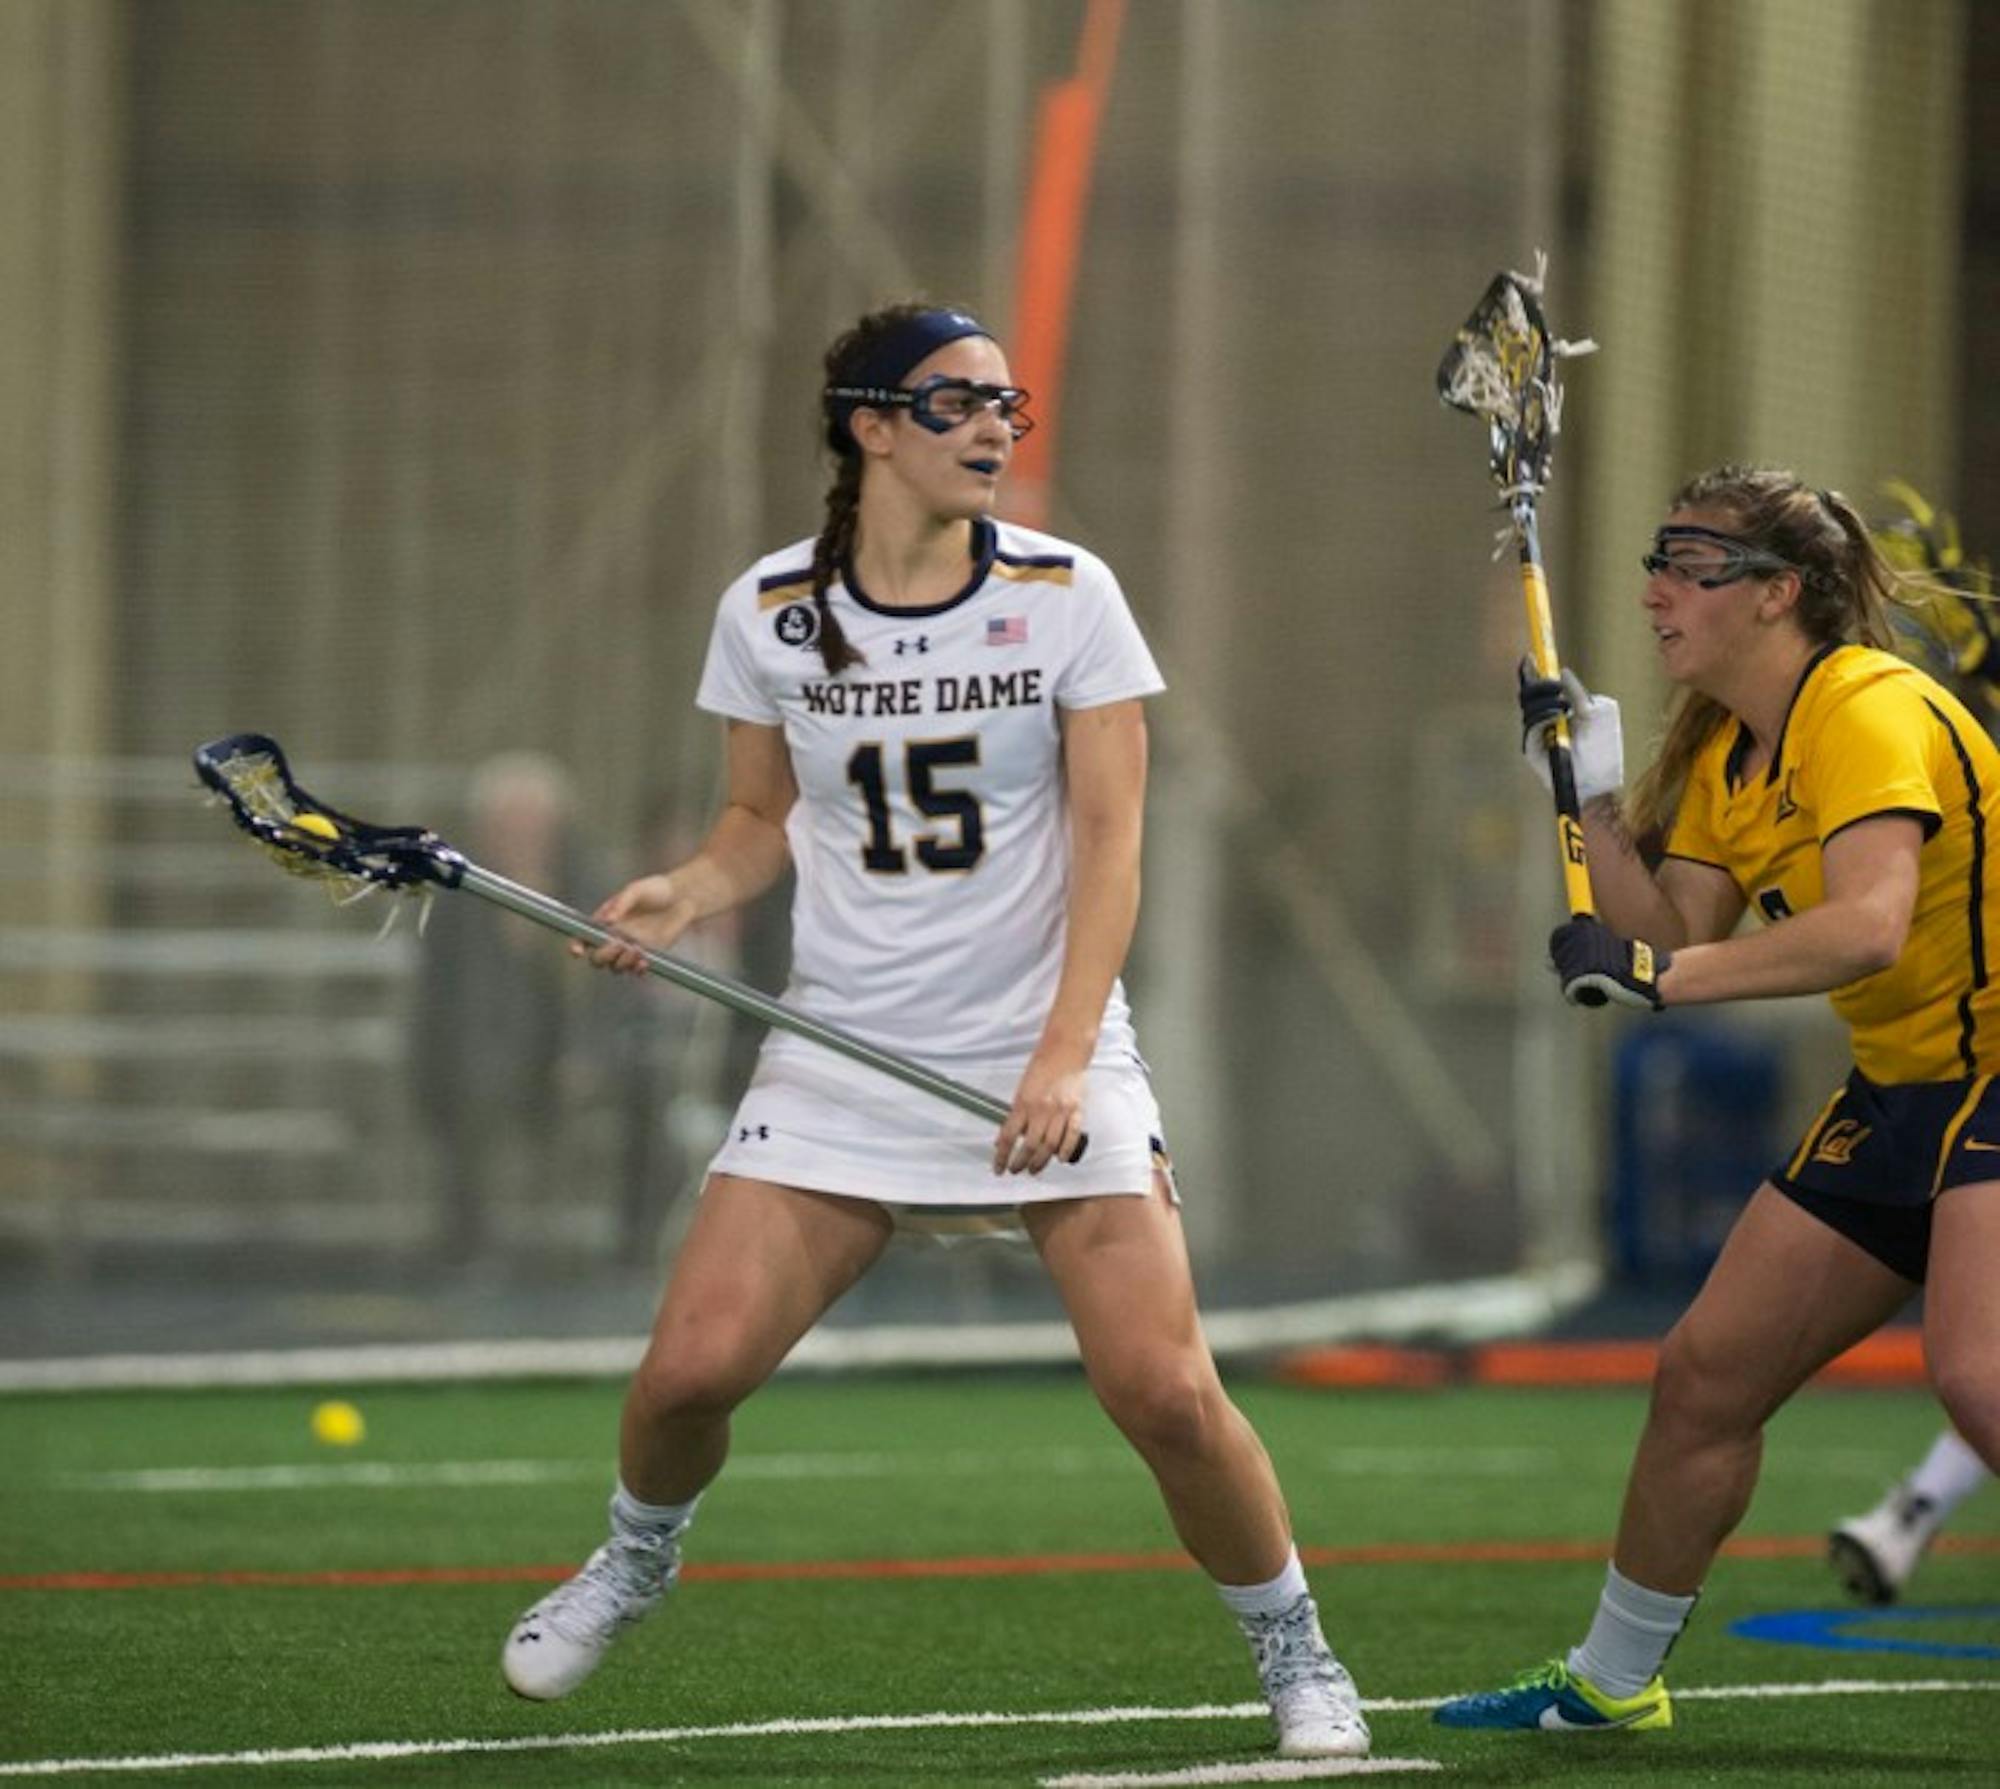 Junior attack Cortney Fortunato surveys the field on offense during Notre Dame’s 21-2 win over California on Feb. 28 at Loftus Sports Center.